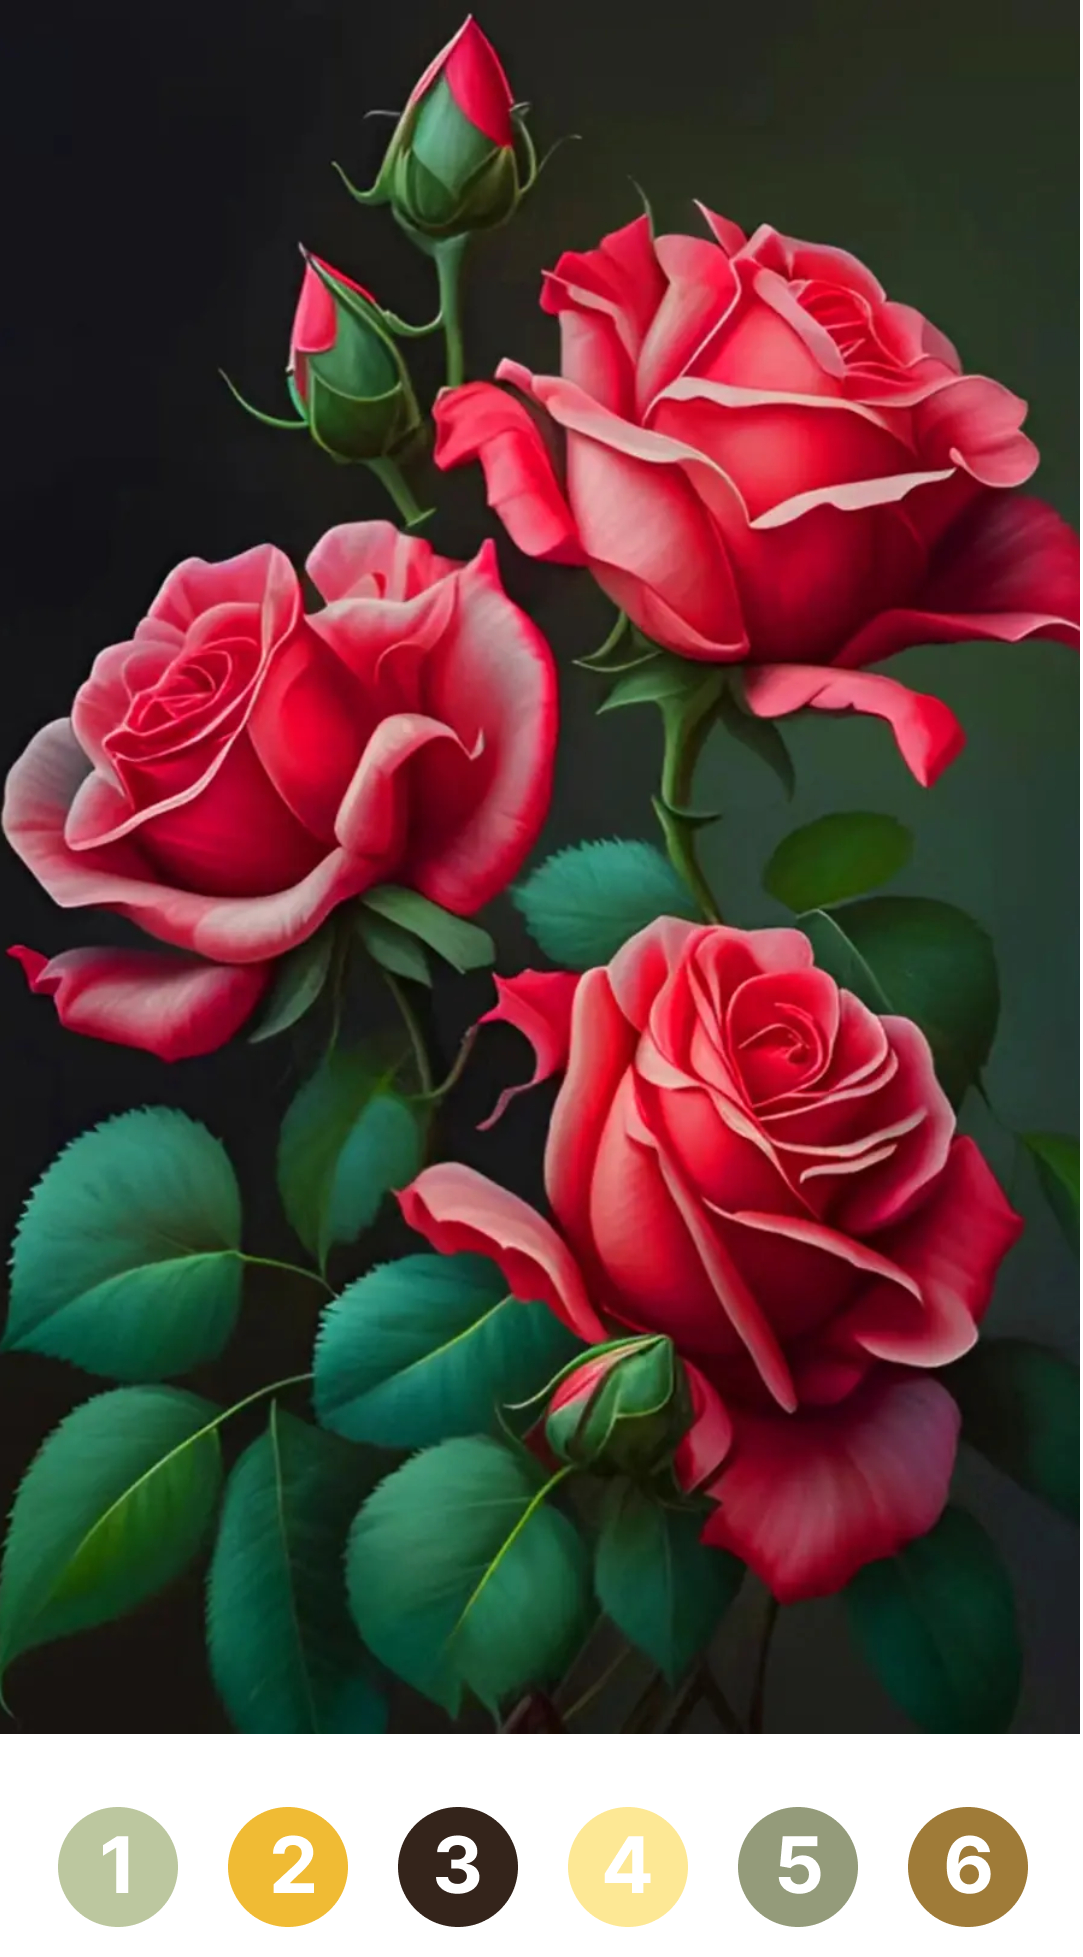 Rose Paint Coloring By Number遊戲截圖